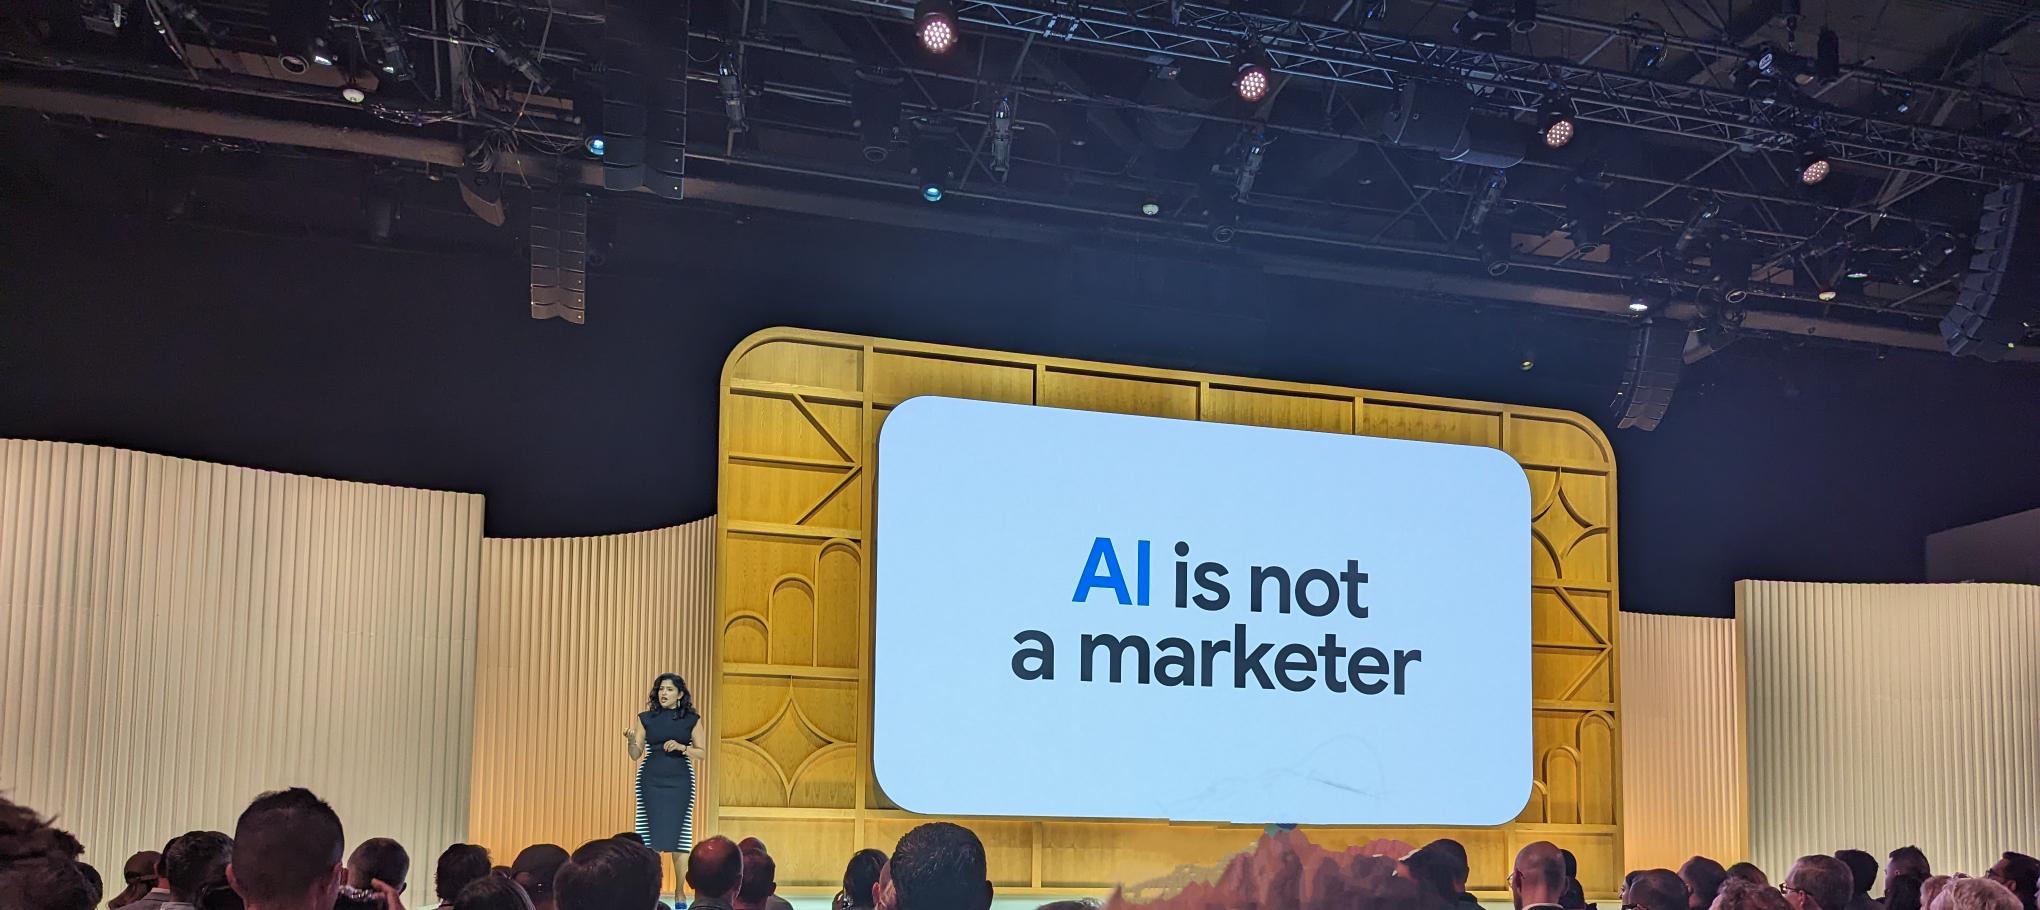 Google Marketing Live AI is not a marketer.